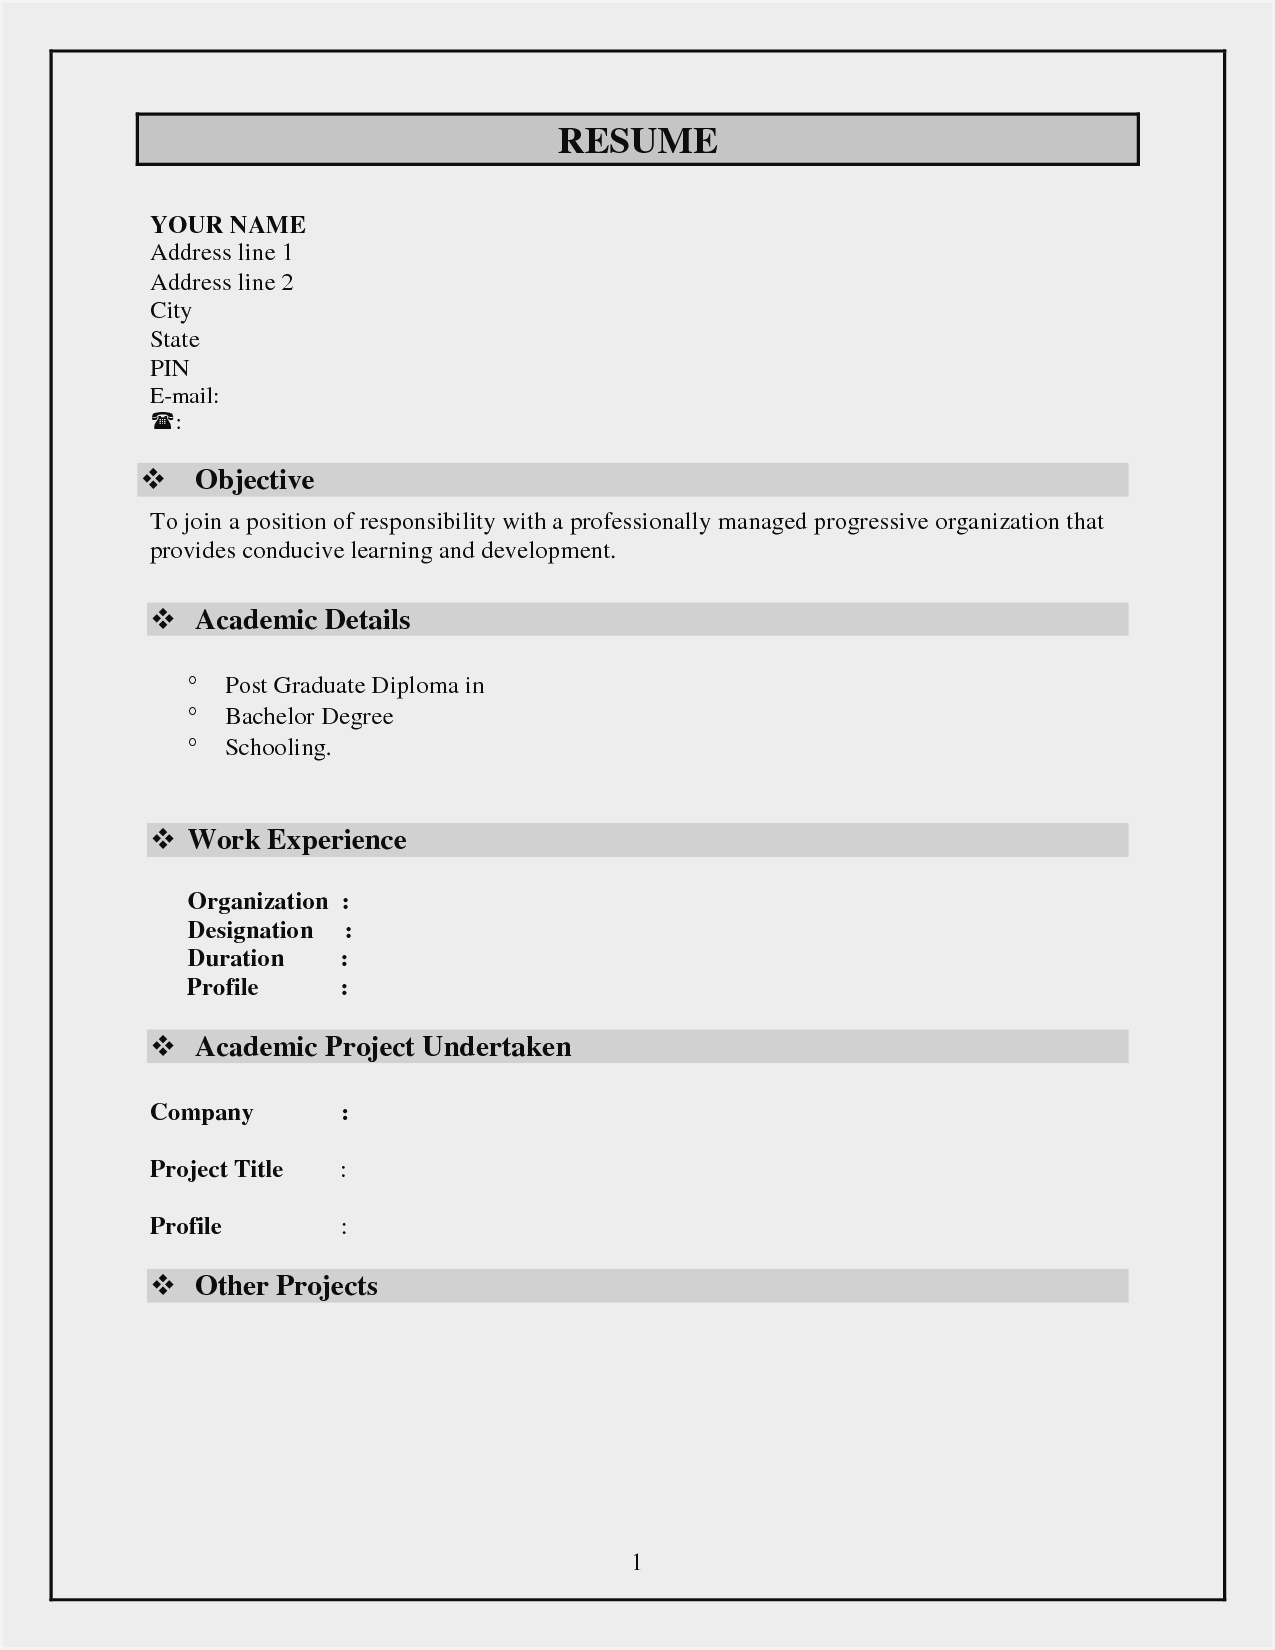 Resume Template Word Download Malaysia – Resume Sample With Job Application Template Word Document